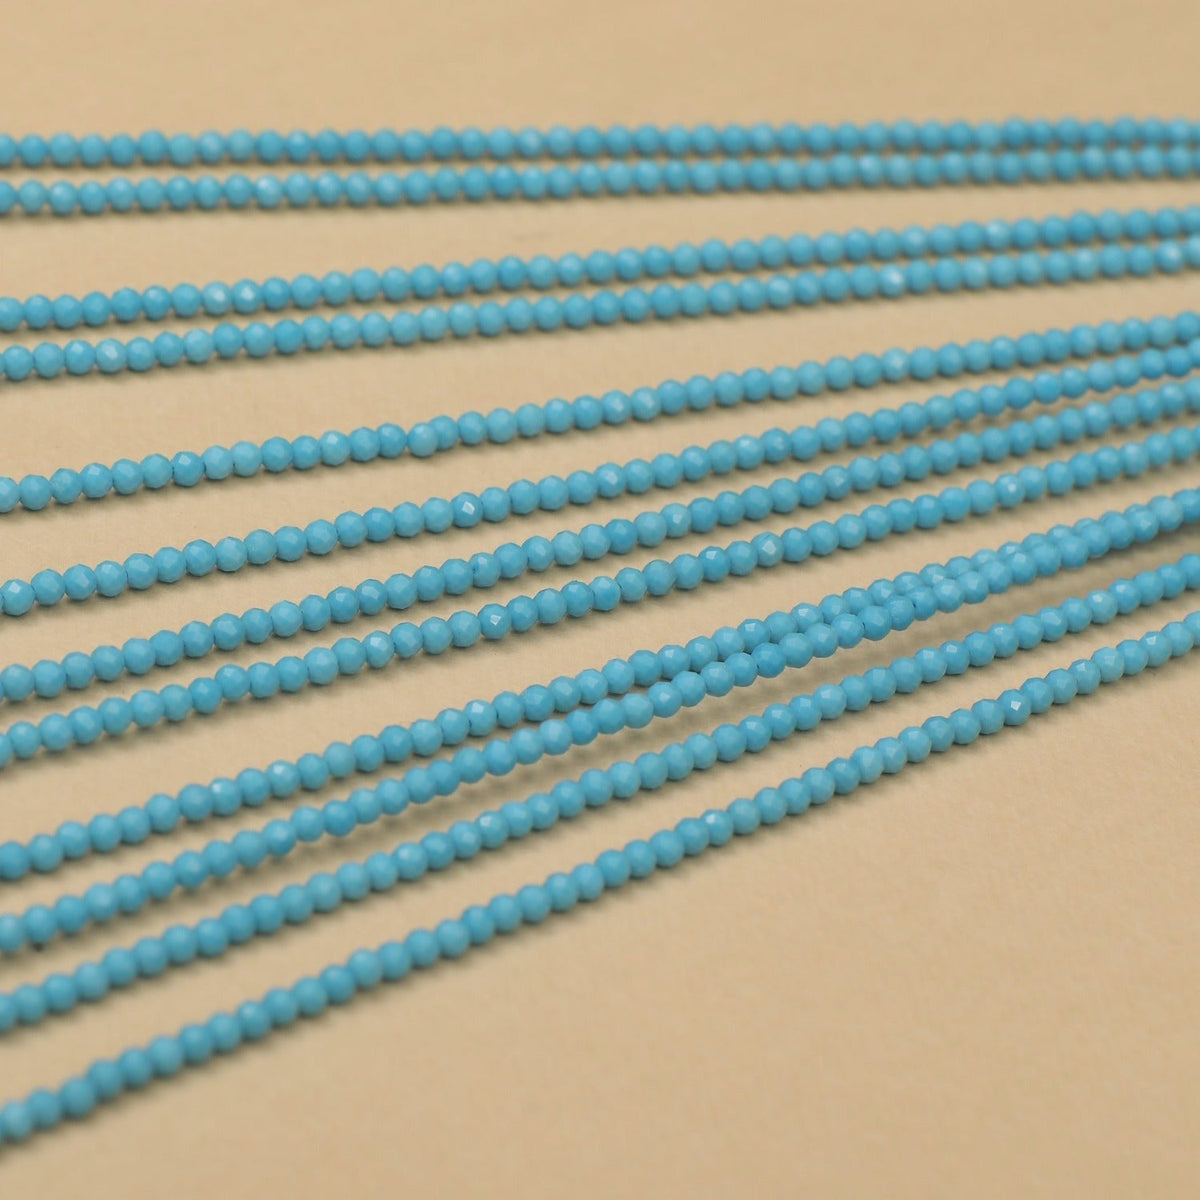 Chinese Turquoise Beads- Sold Per Stand